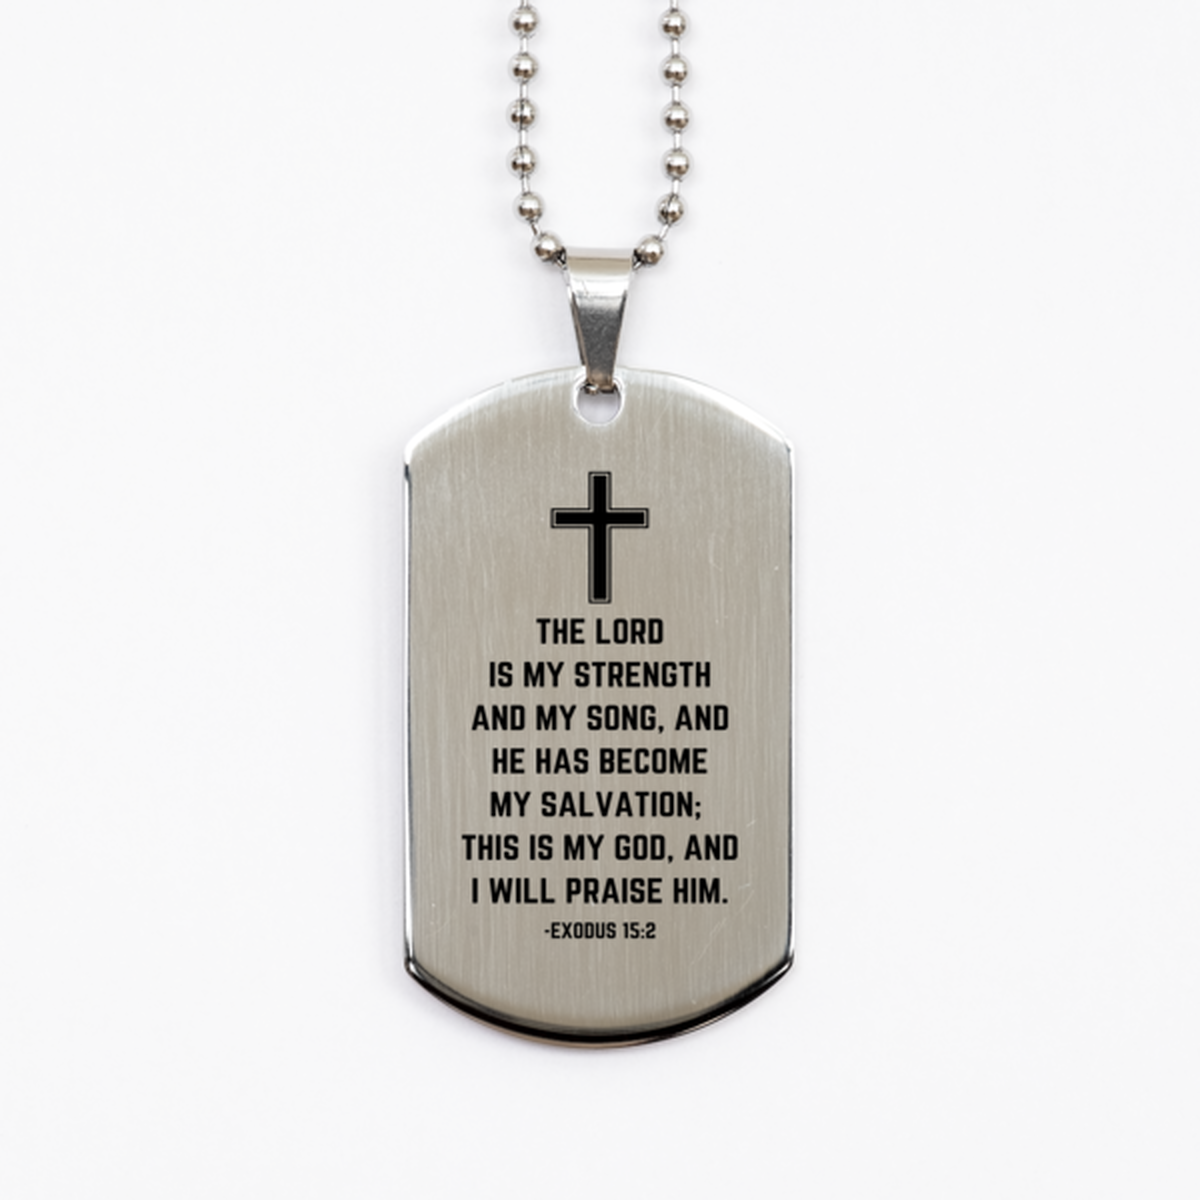 Baptism Gifts For Teenage Boys Girls, Christian Bible Verse Silver Dog Tag, The Lord is my strength, Confirmation Gifts, Bible Verse Necklace for Son, Godson, Grandson, Nephew